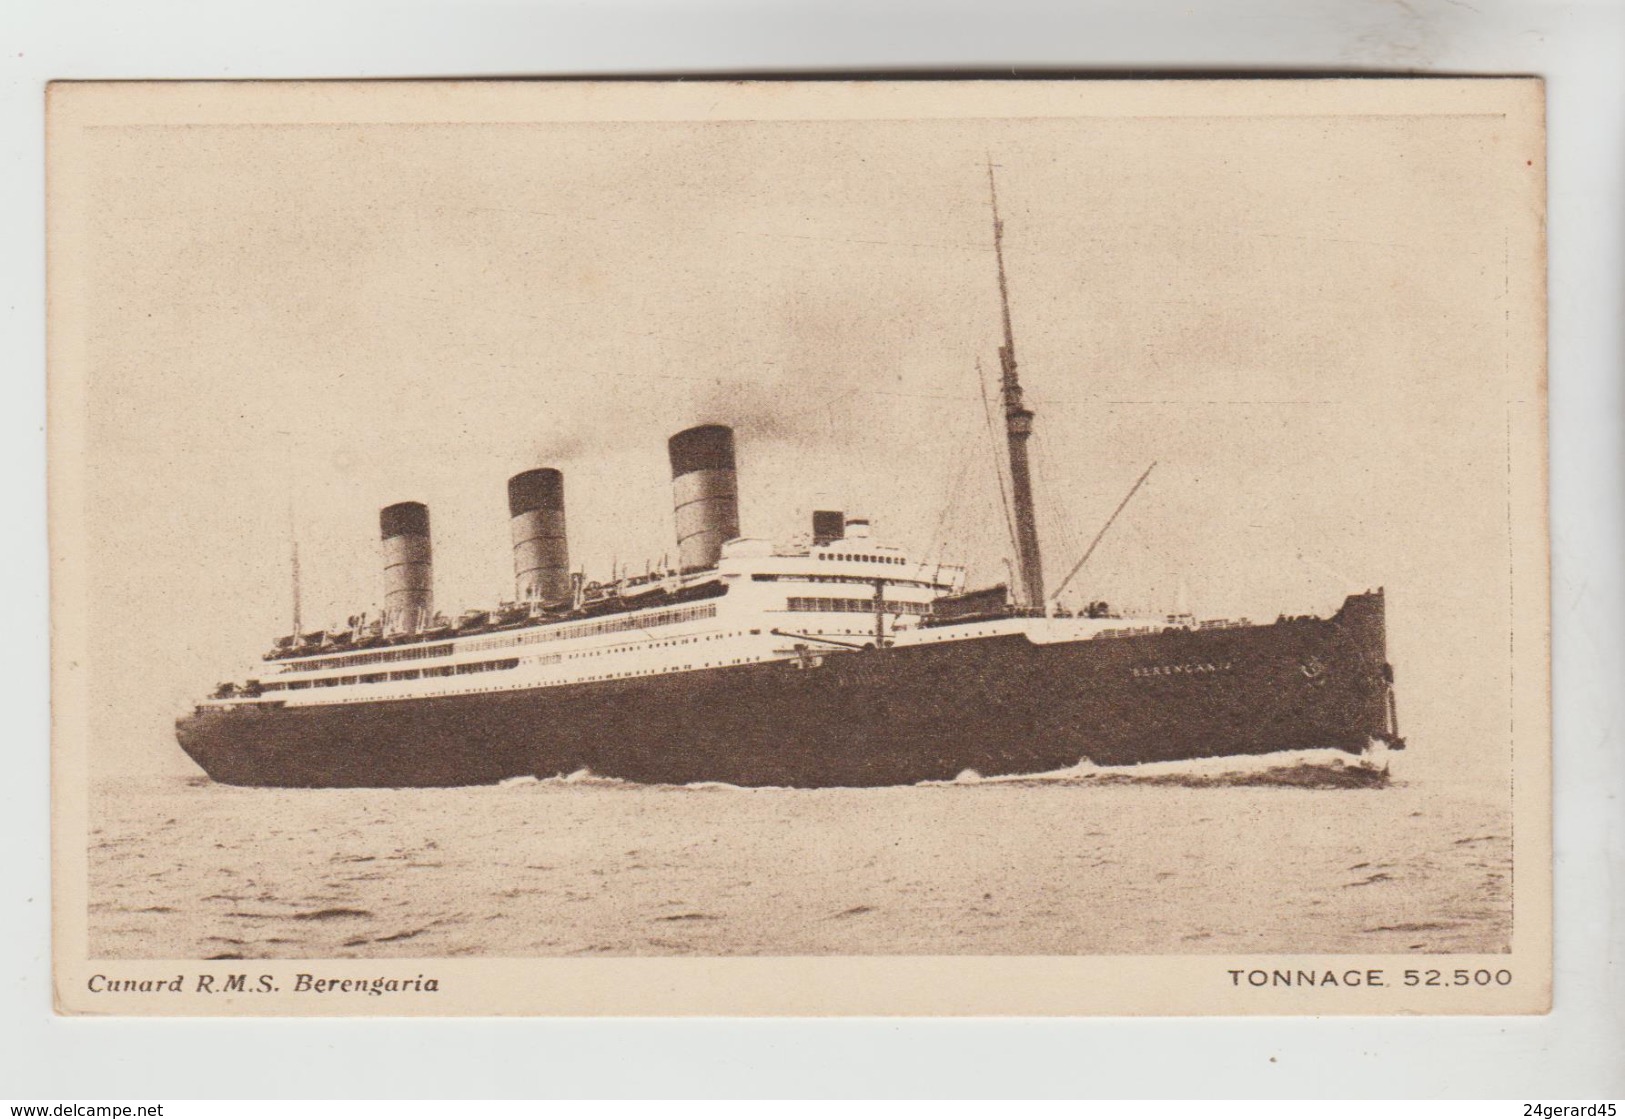 3 CPSM TRANSPORT BATEAU PAQUEBOT - Cunard Line "R.M.S BERENGARIA" + The Lounge + Palm Court - Steamers